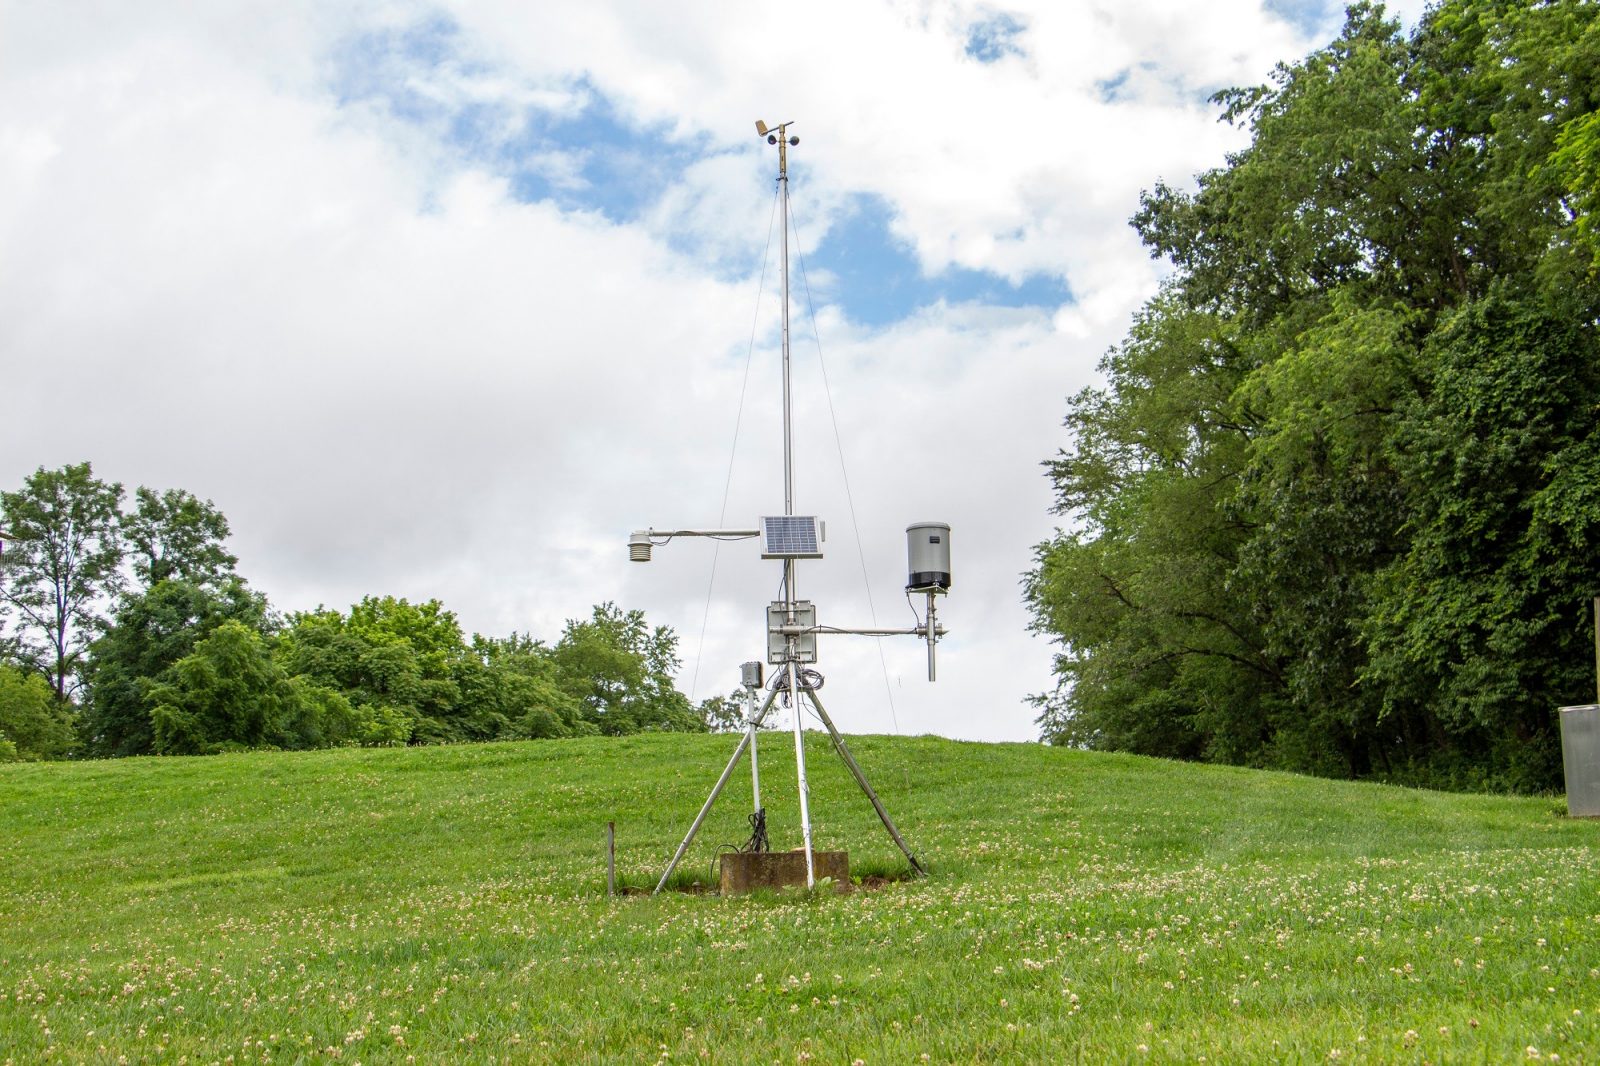 Local weather forecasting technology heralds the advent of a SmartFarm network